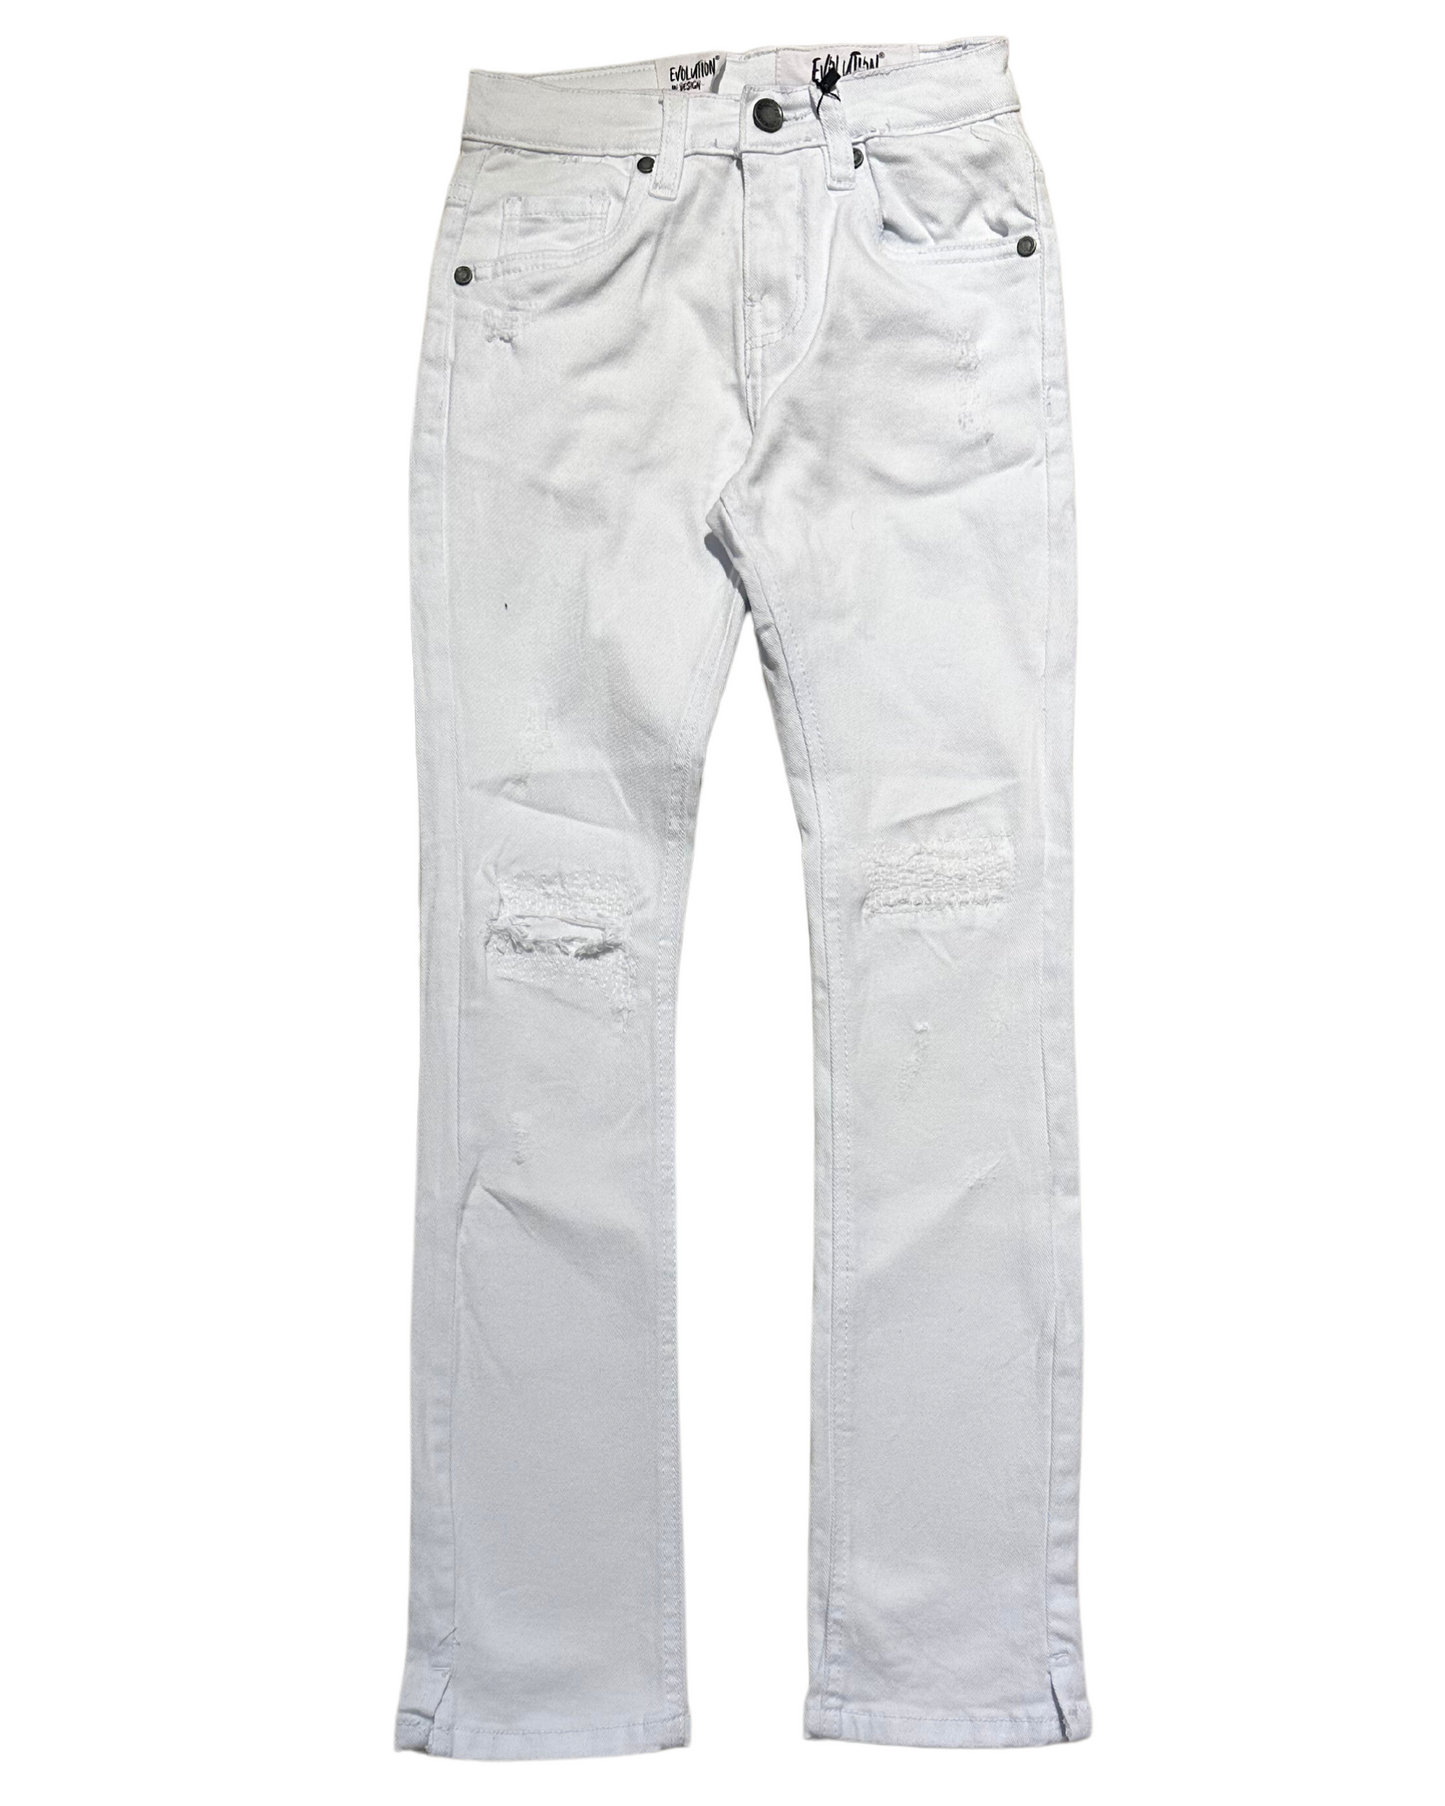 Kids Stacked Jeans 33990